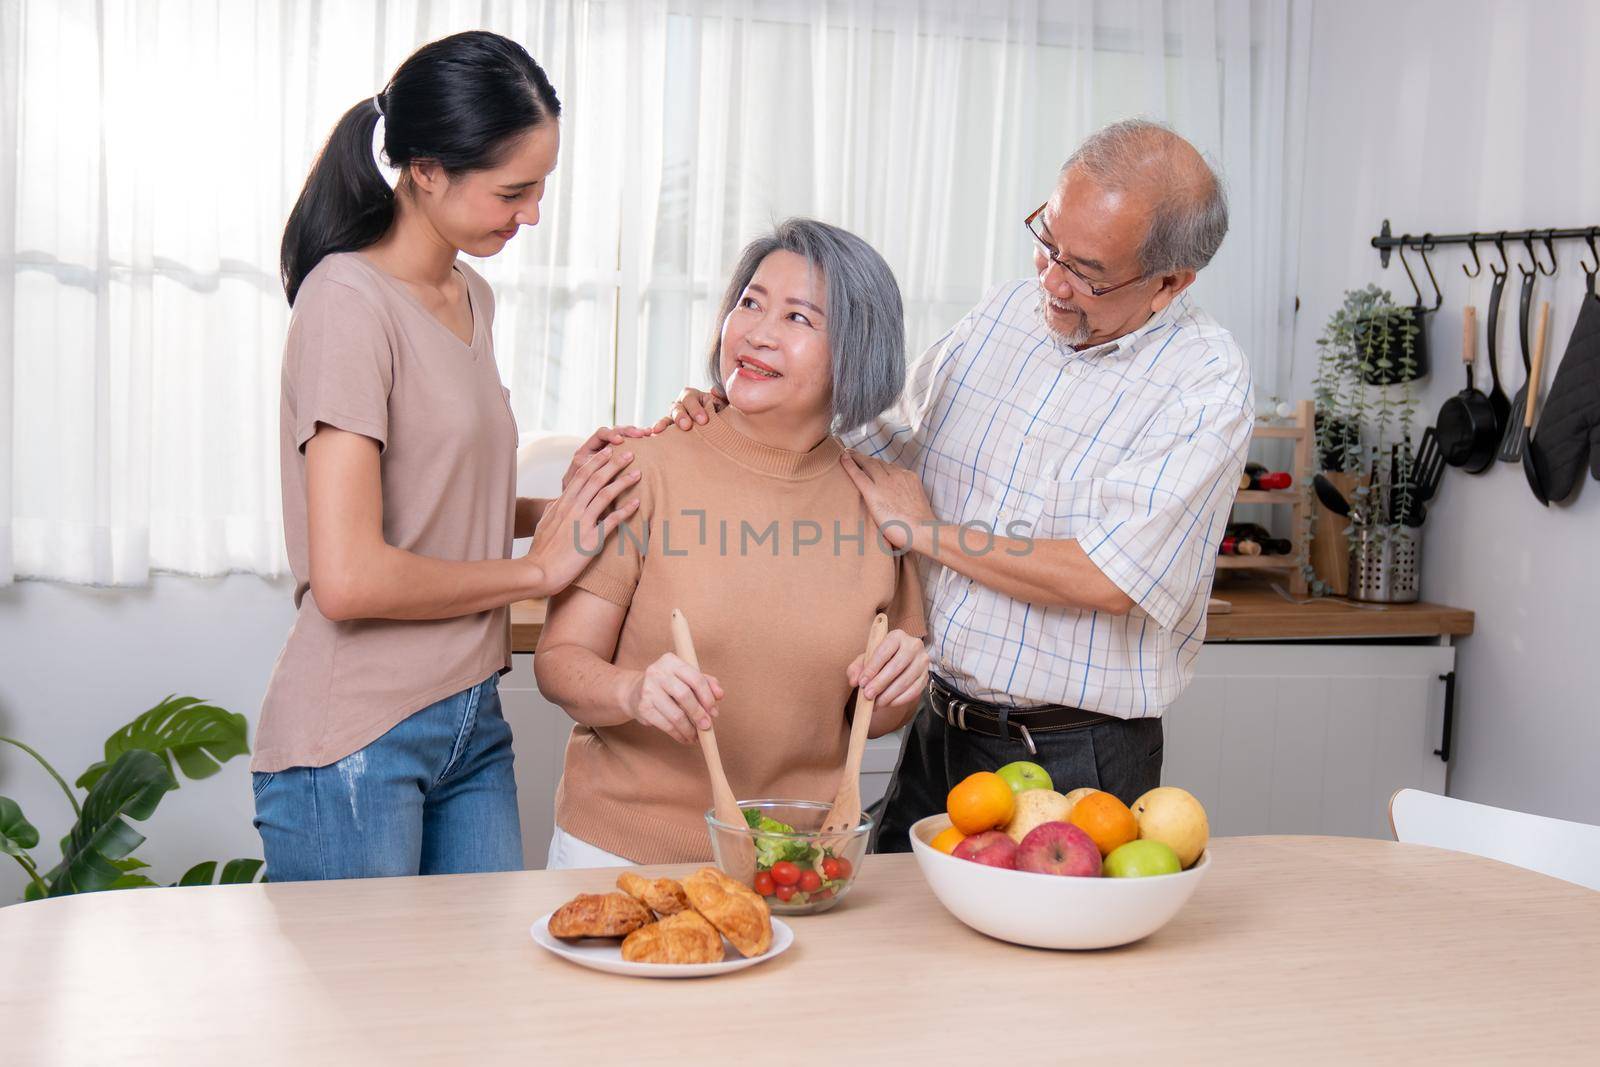 Contented family, daughter, father, mother prepare bread veggies and fruit salad together in their kitchen.